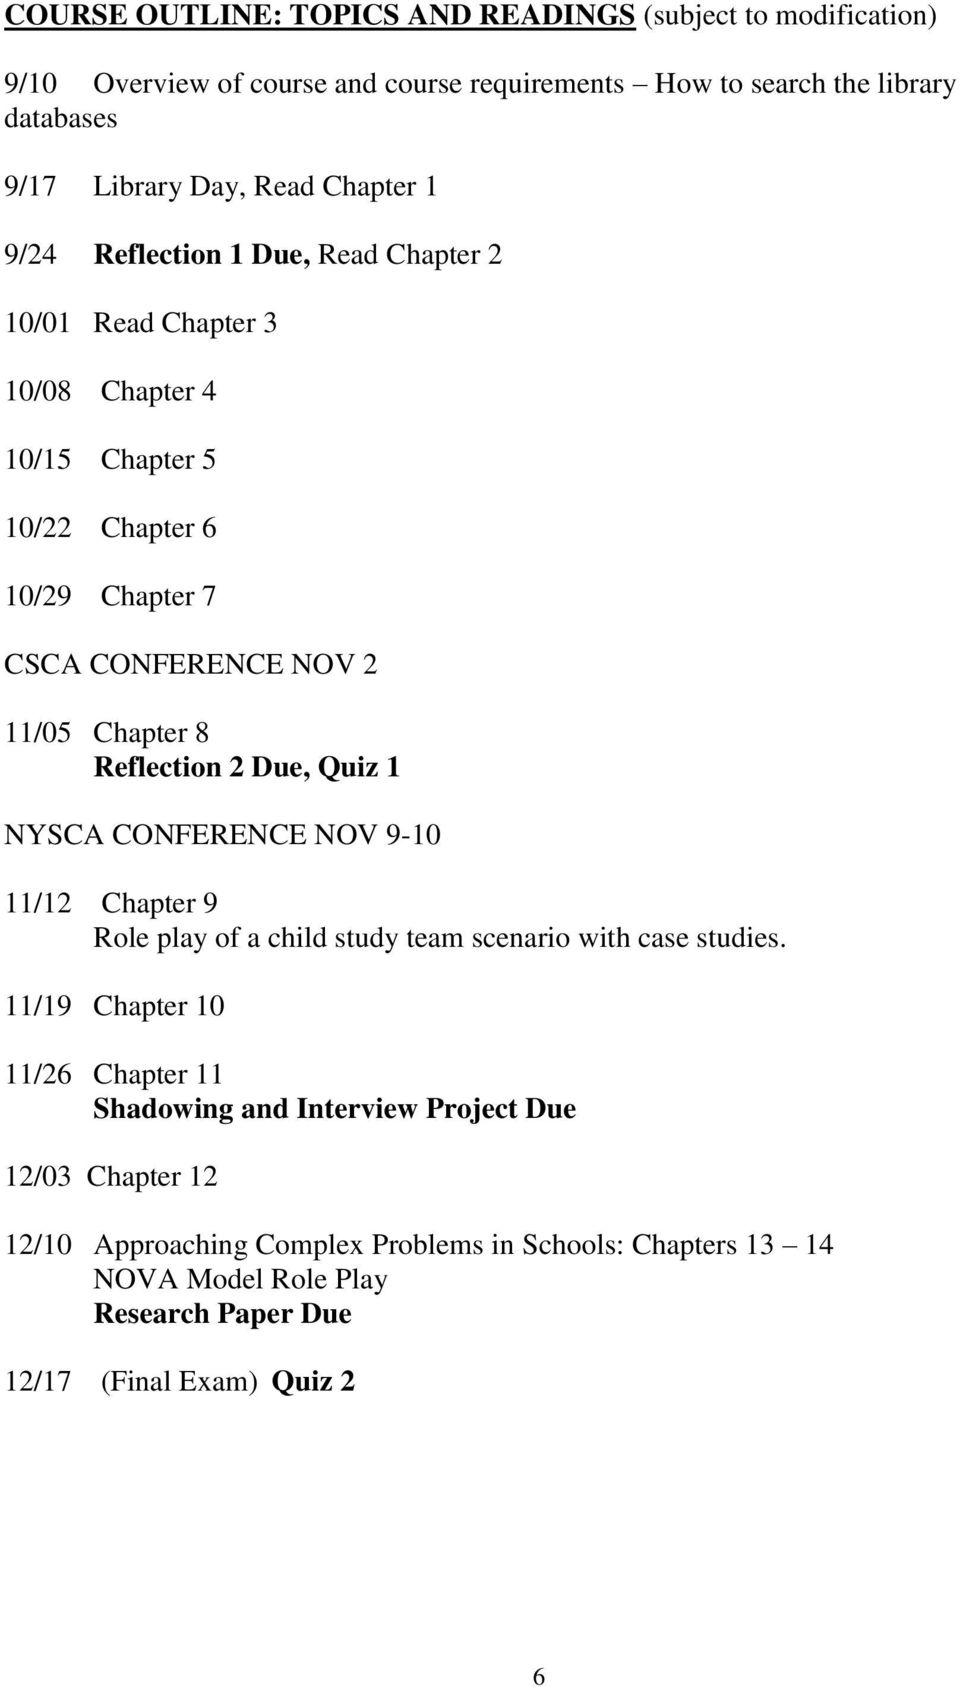 Reflection 2 Due, Quiz 1 NYSCA CONFERENCE NOV 9-10 11/12 Chapter 9 Role play of a child study team scenario with case studies.